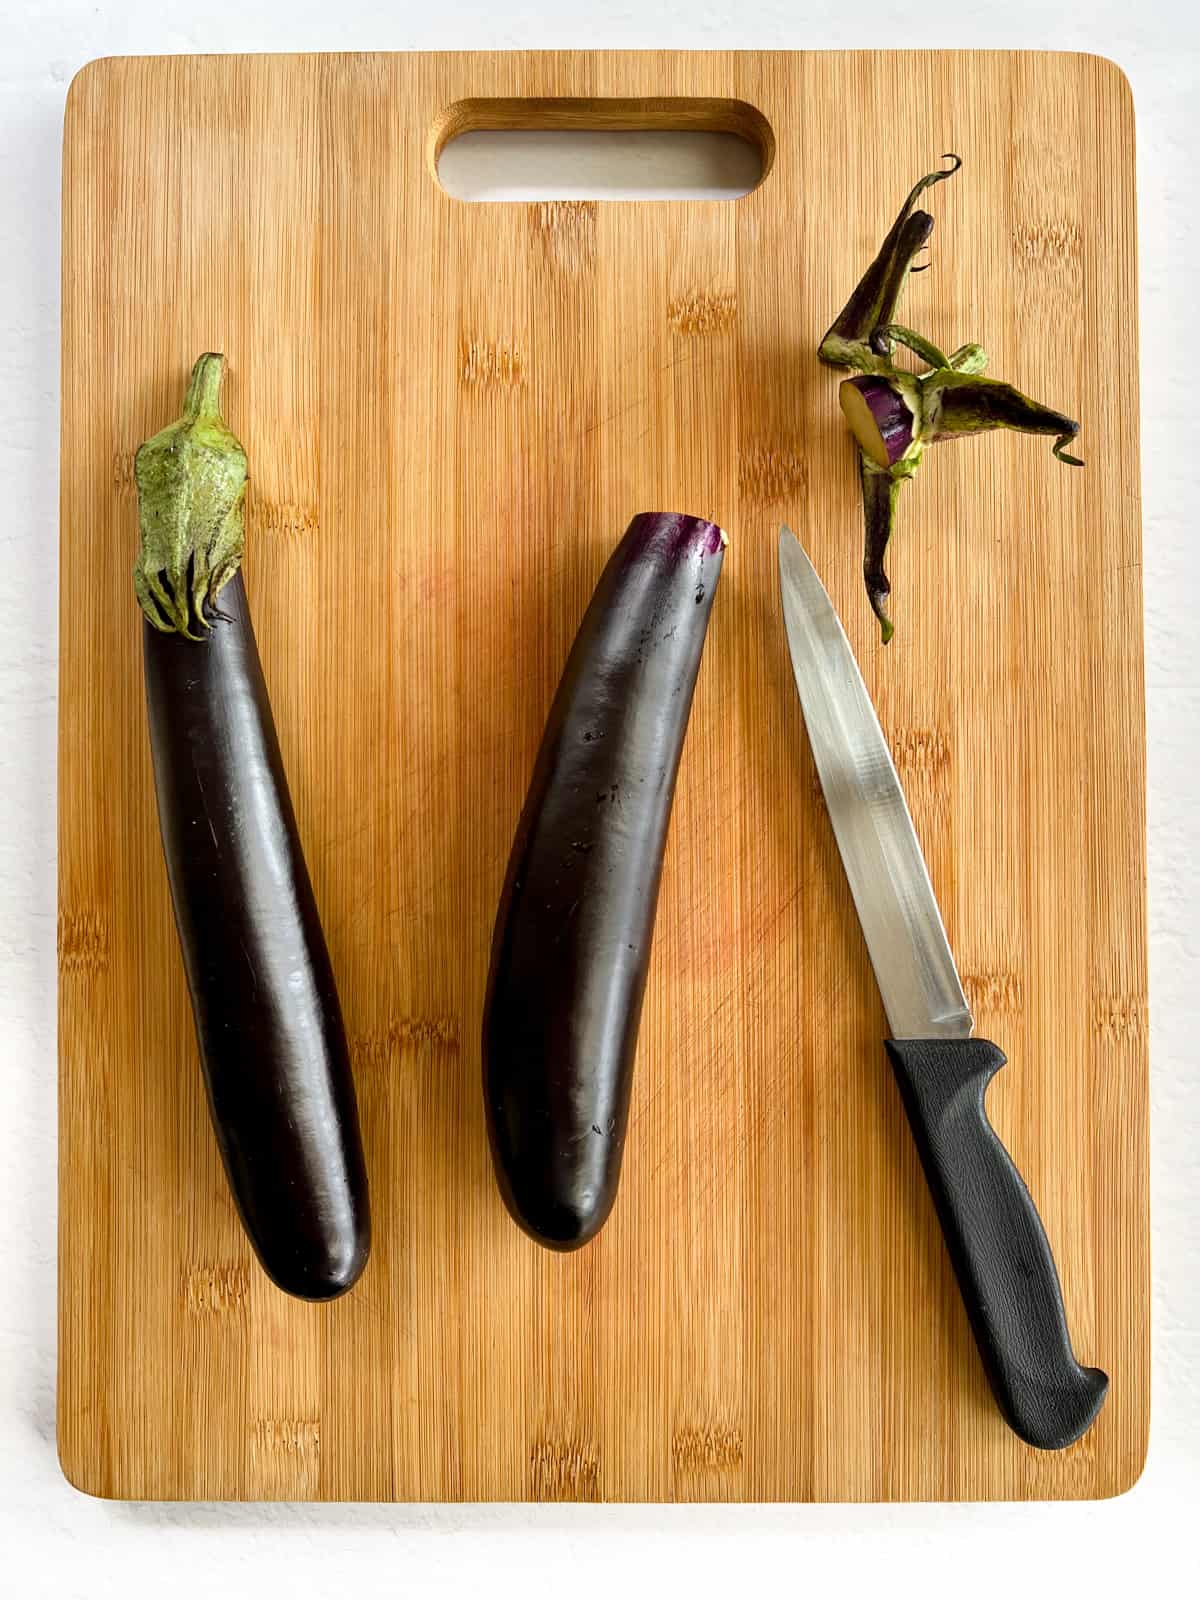 two long eggplants one with its top cut off and a knife on a timber chopping board